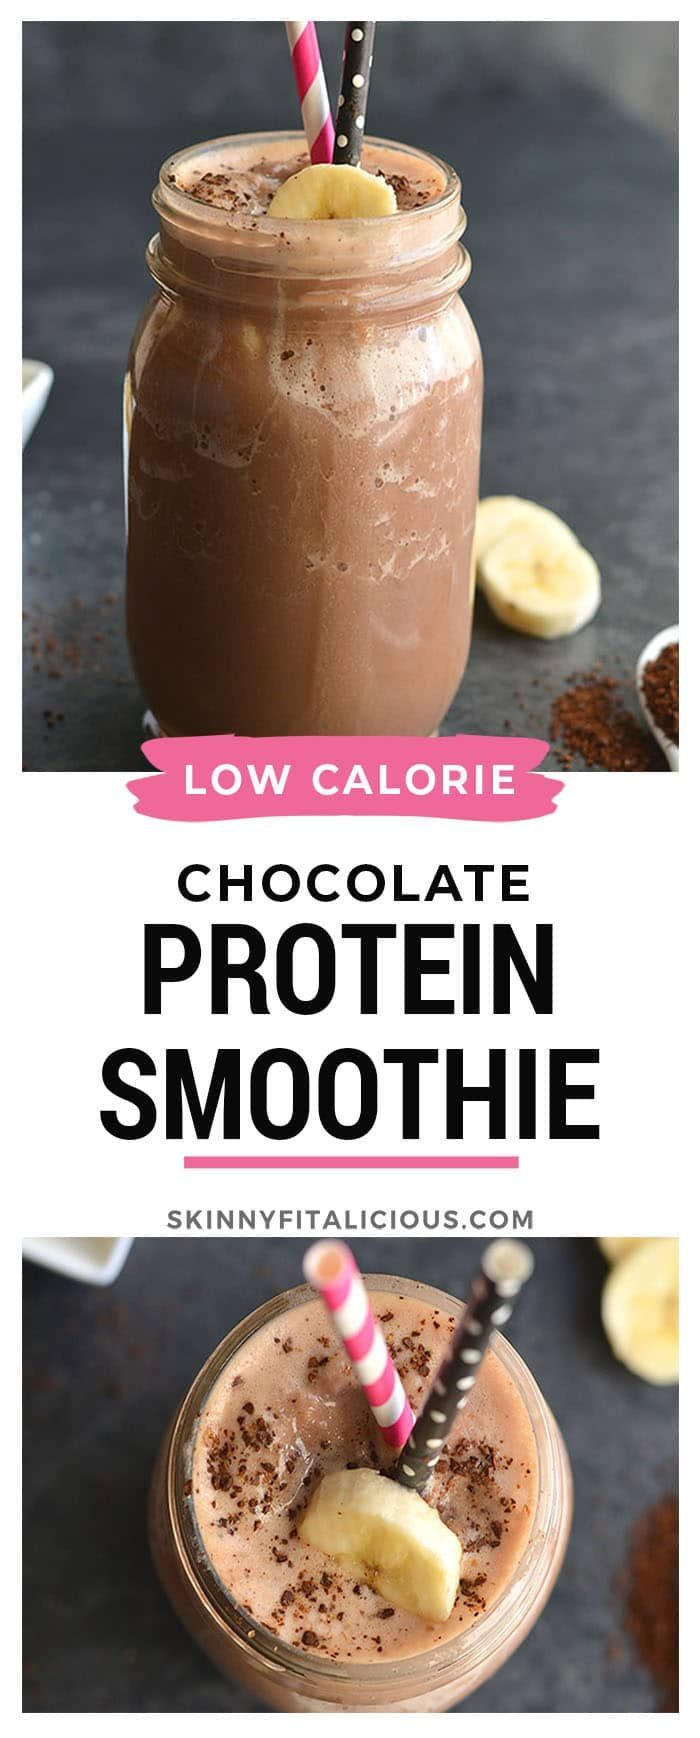 Low Calorie Protein Smoothies
 Chocolate Protein Smoothie in 2020